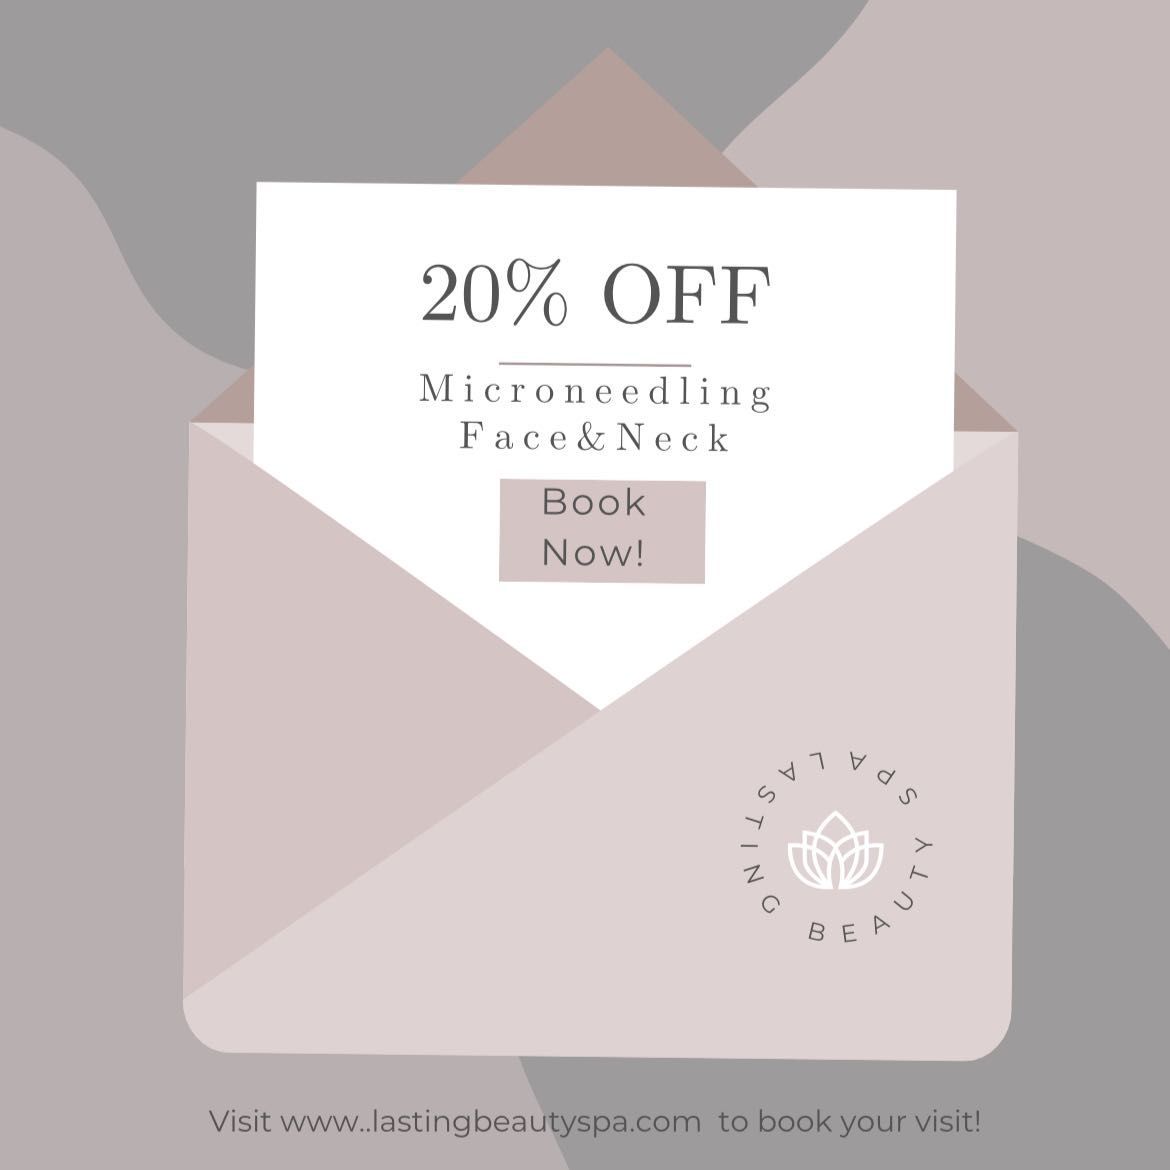 March Special - 20%OFF Microneedling (Face & Neck) portfolio